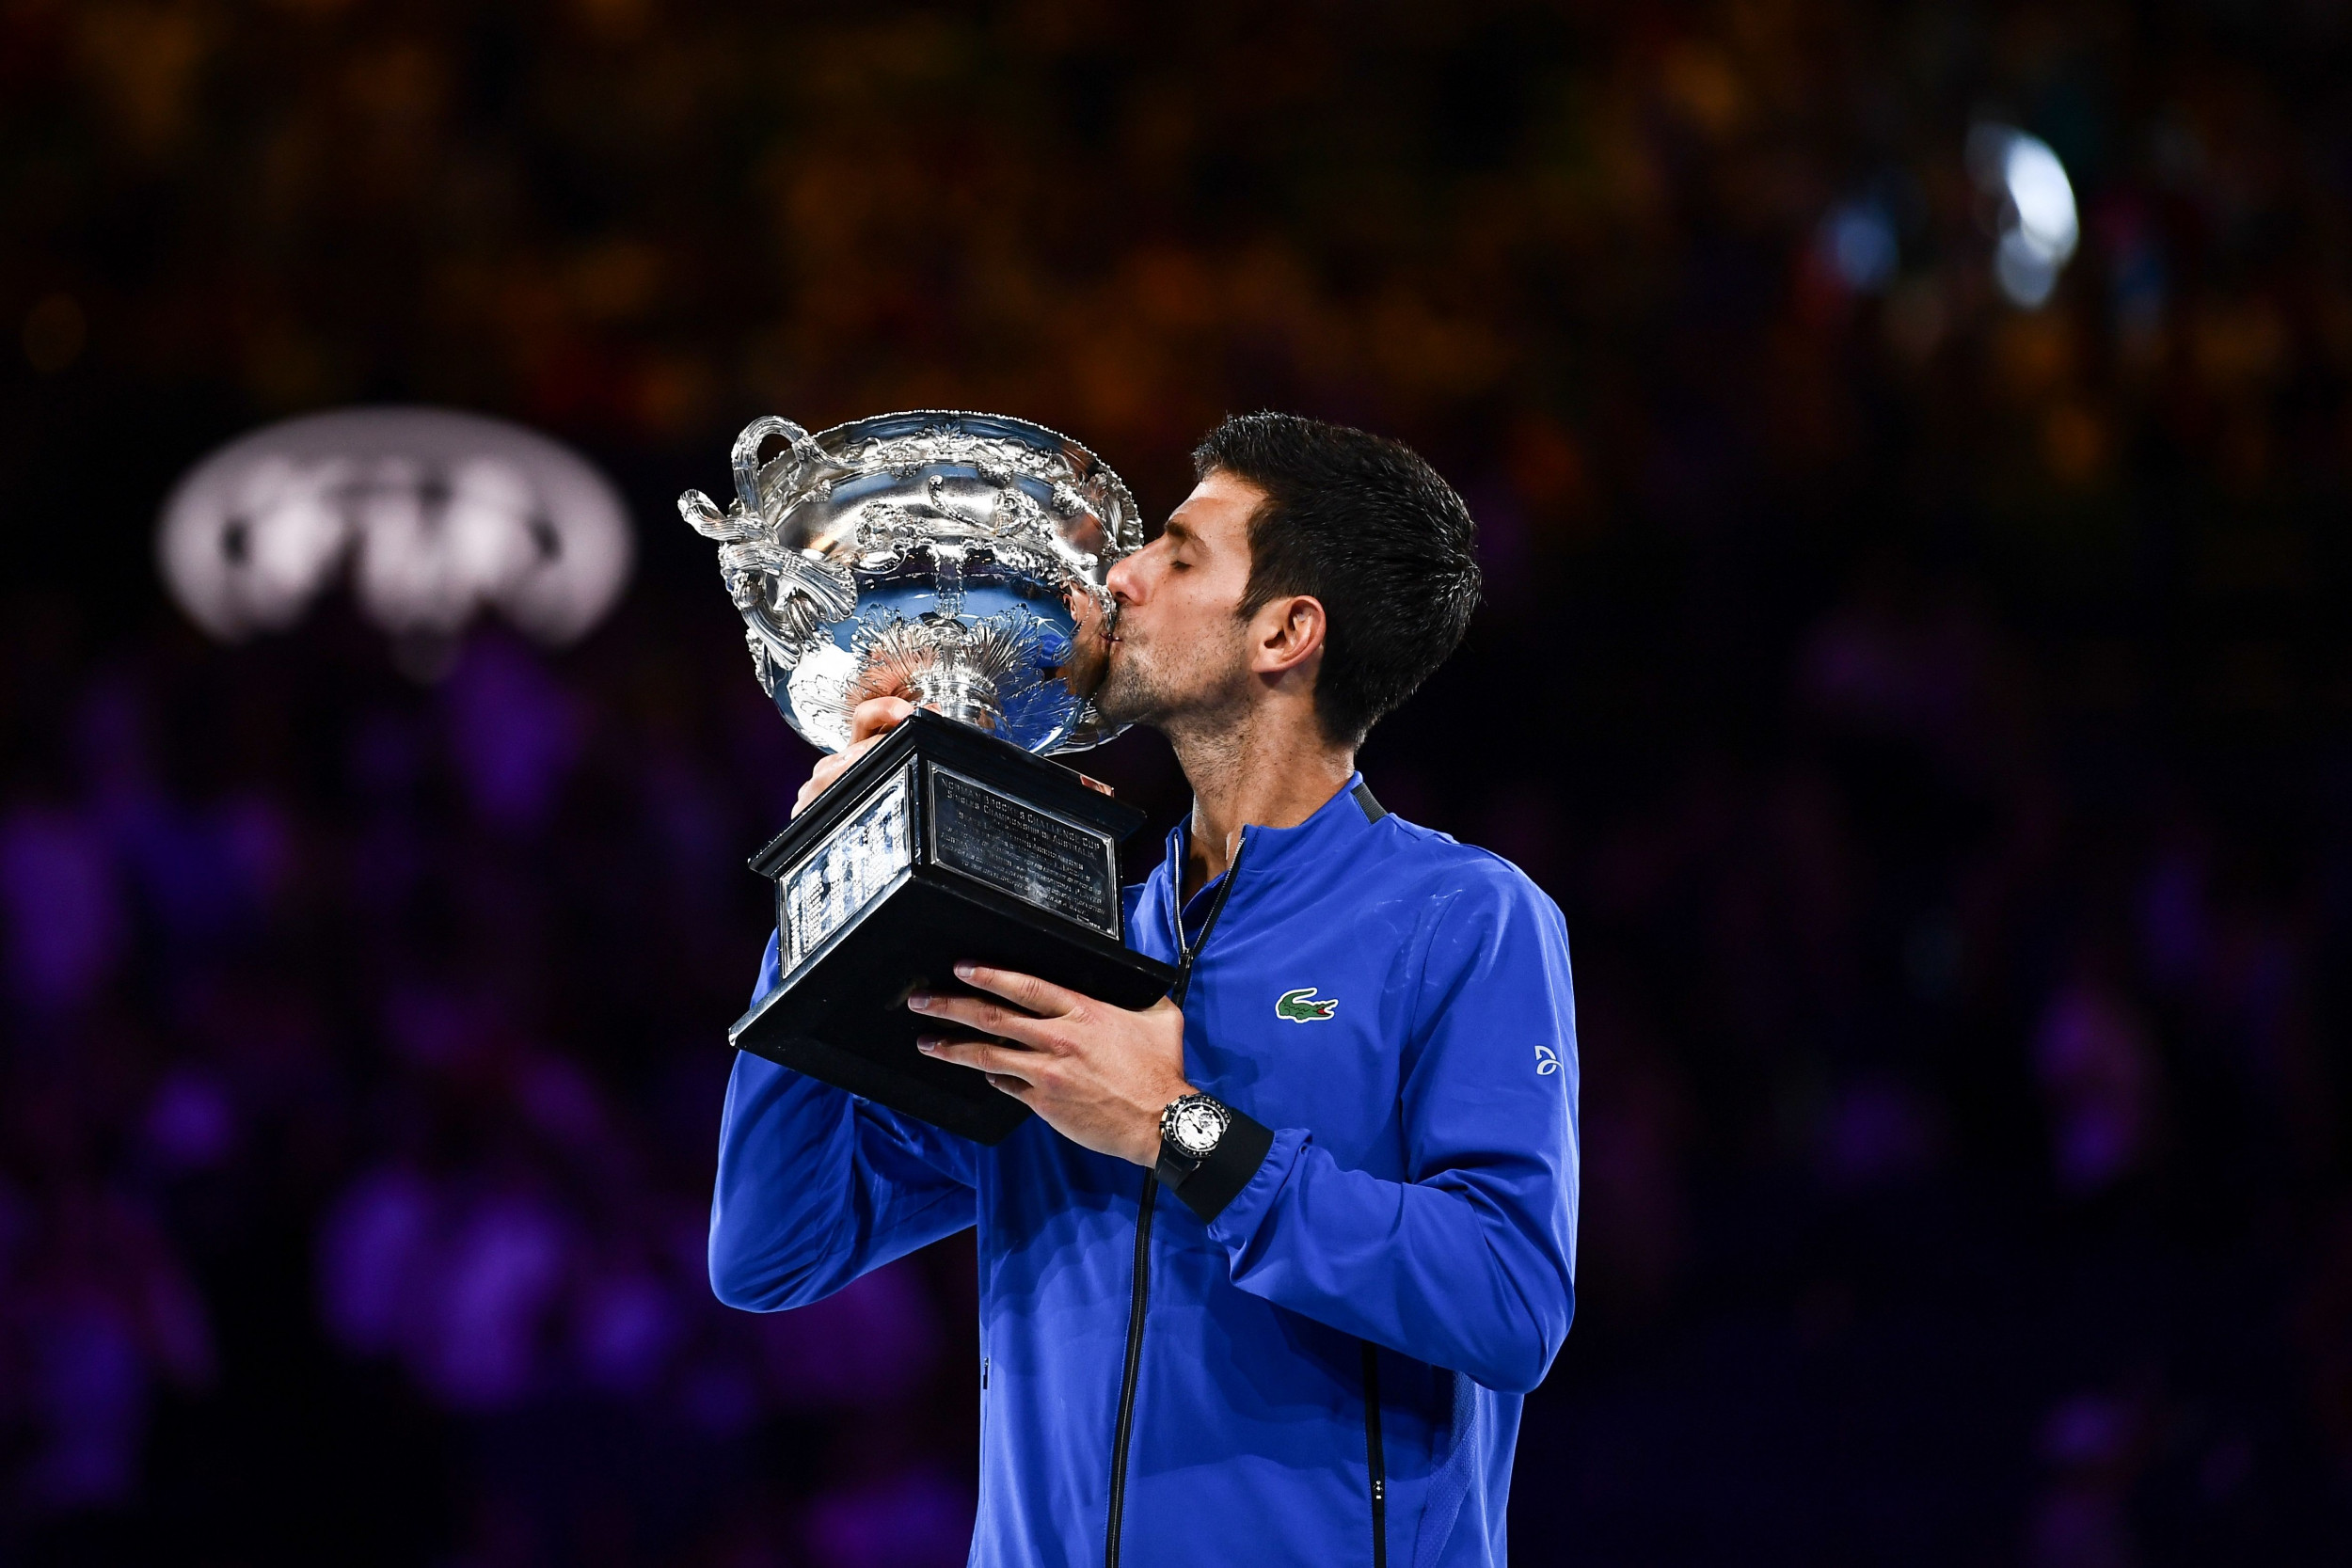 When Does the Australian Open 2020 Start? Dates, Seedings, TV Channel for First Grand Slam Tournament of the Year